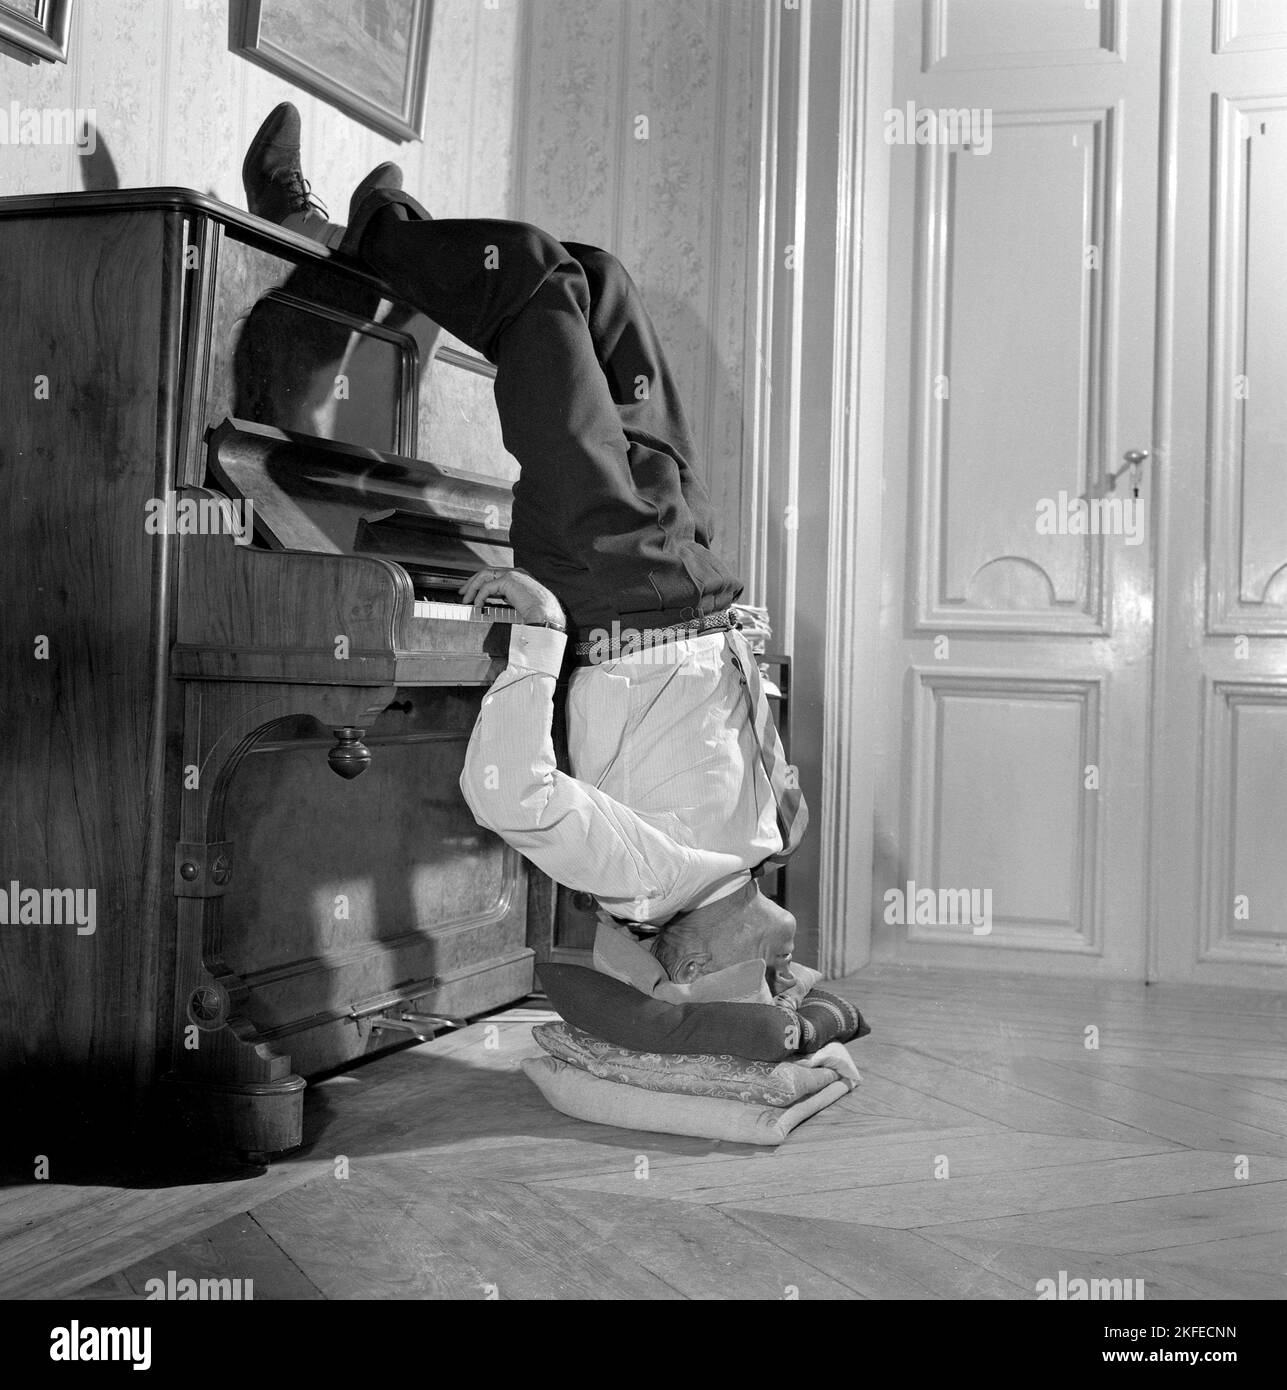 Man in the 1950s. With nothing else to do, this man finds that playing the piano standing upside down, works for him. Sweden 1957 Conard ref 3273 Stock Photo